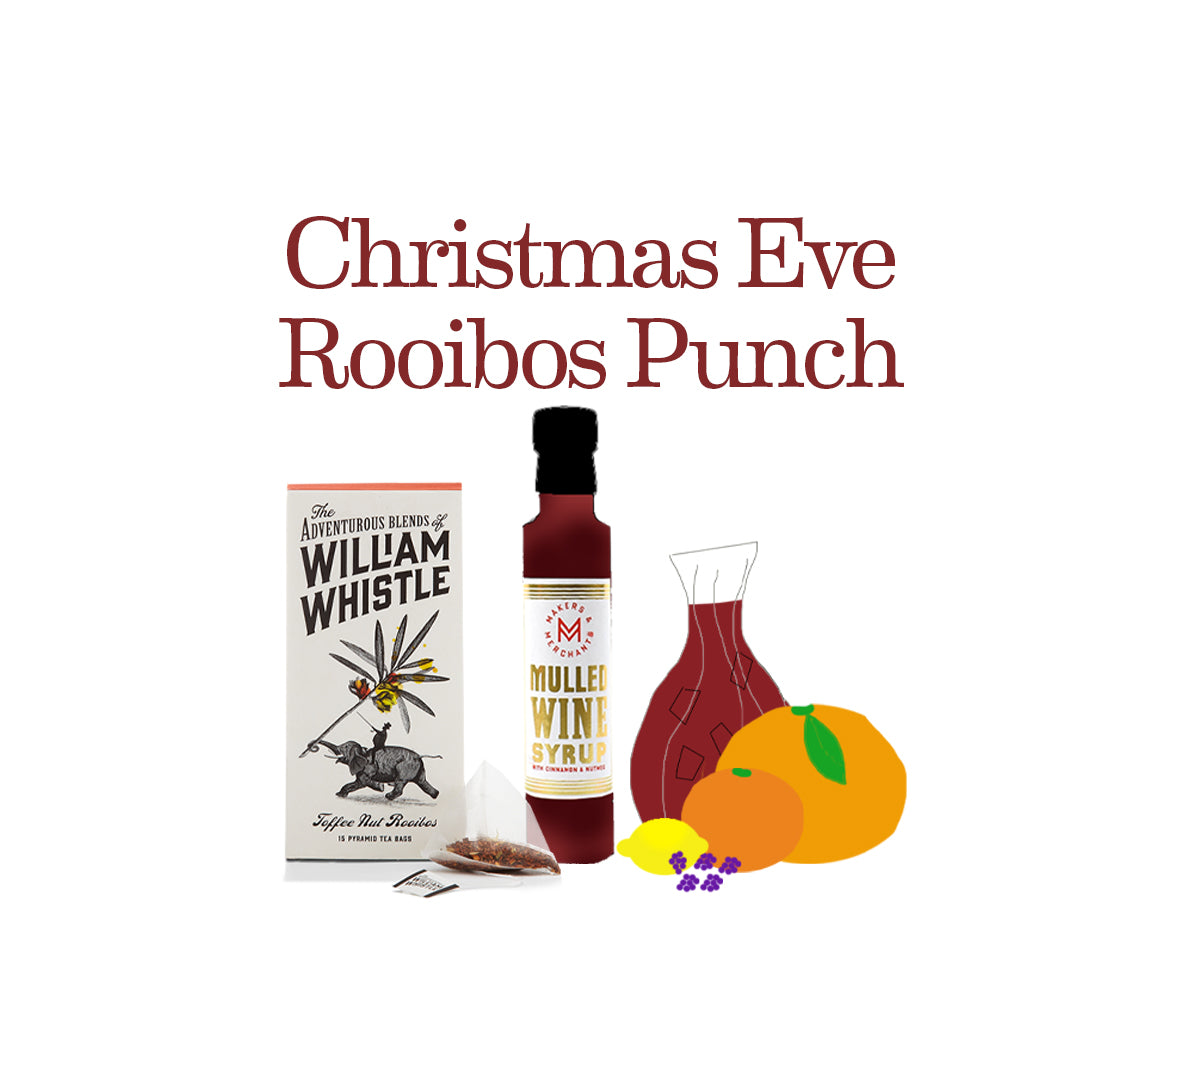 Christmas Eve Rooibos Punch